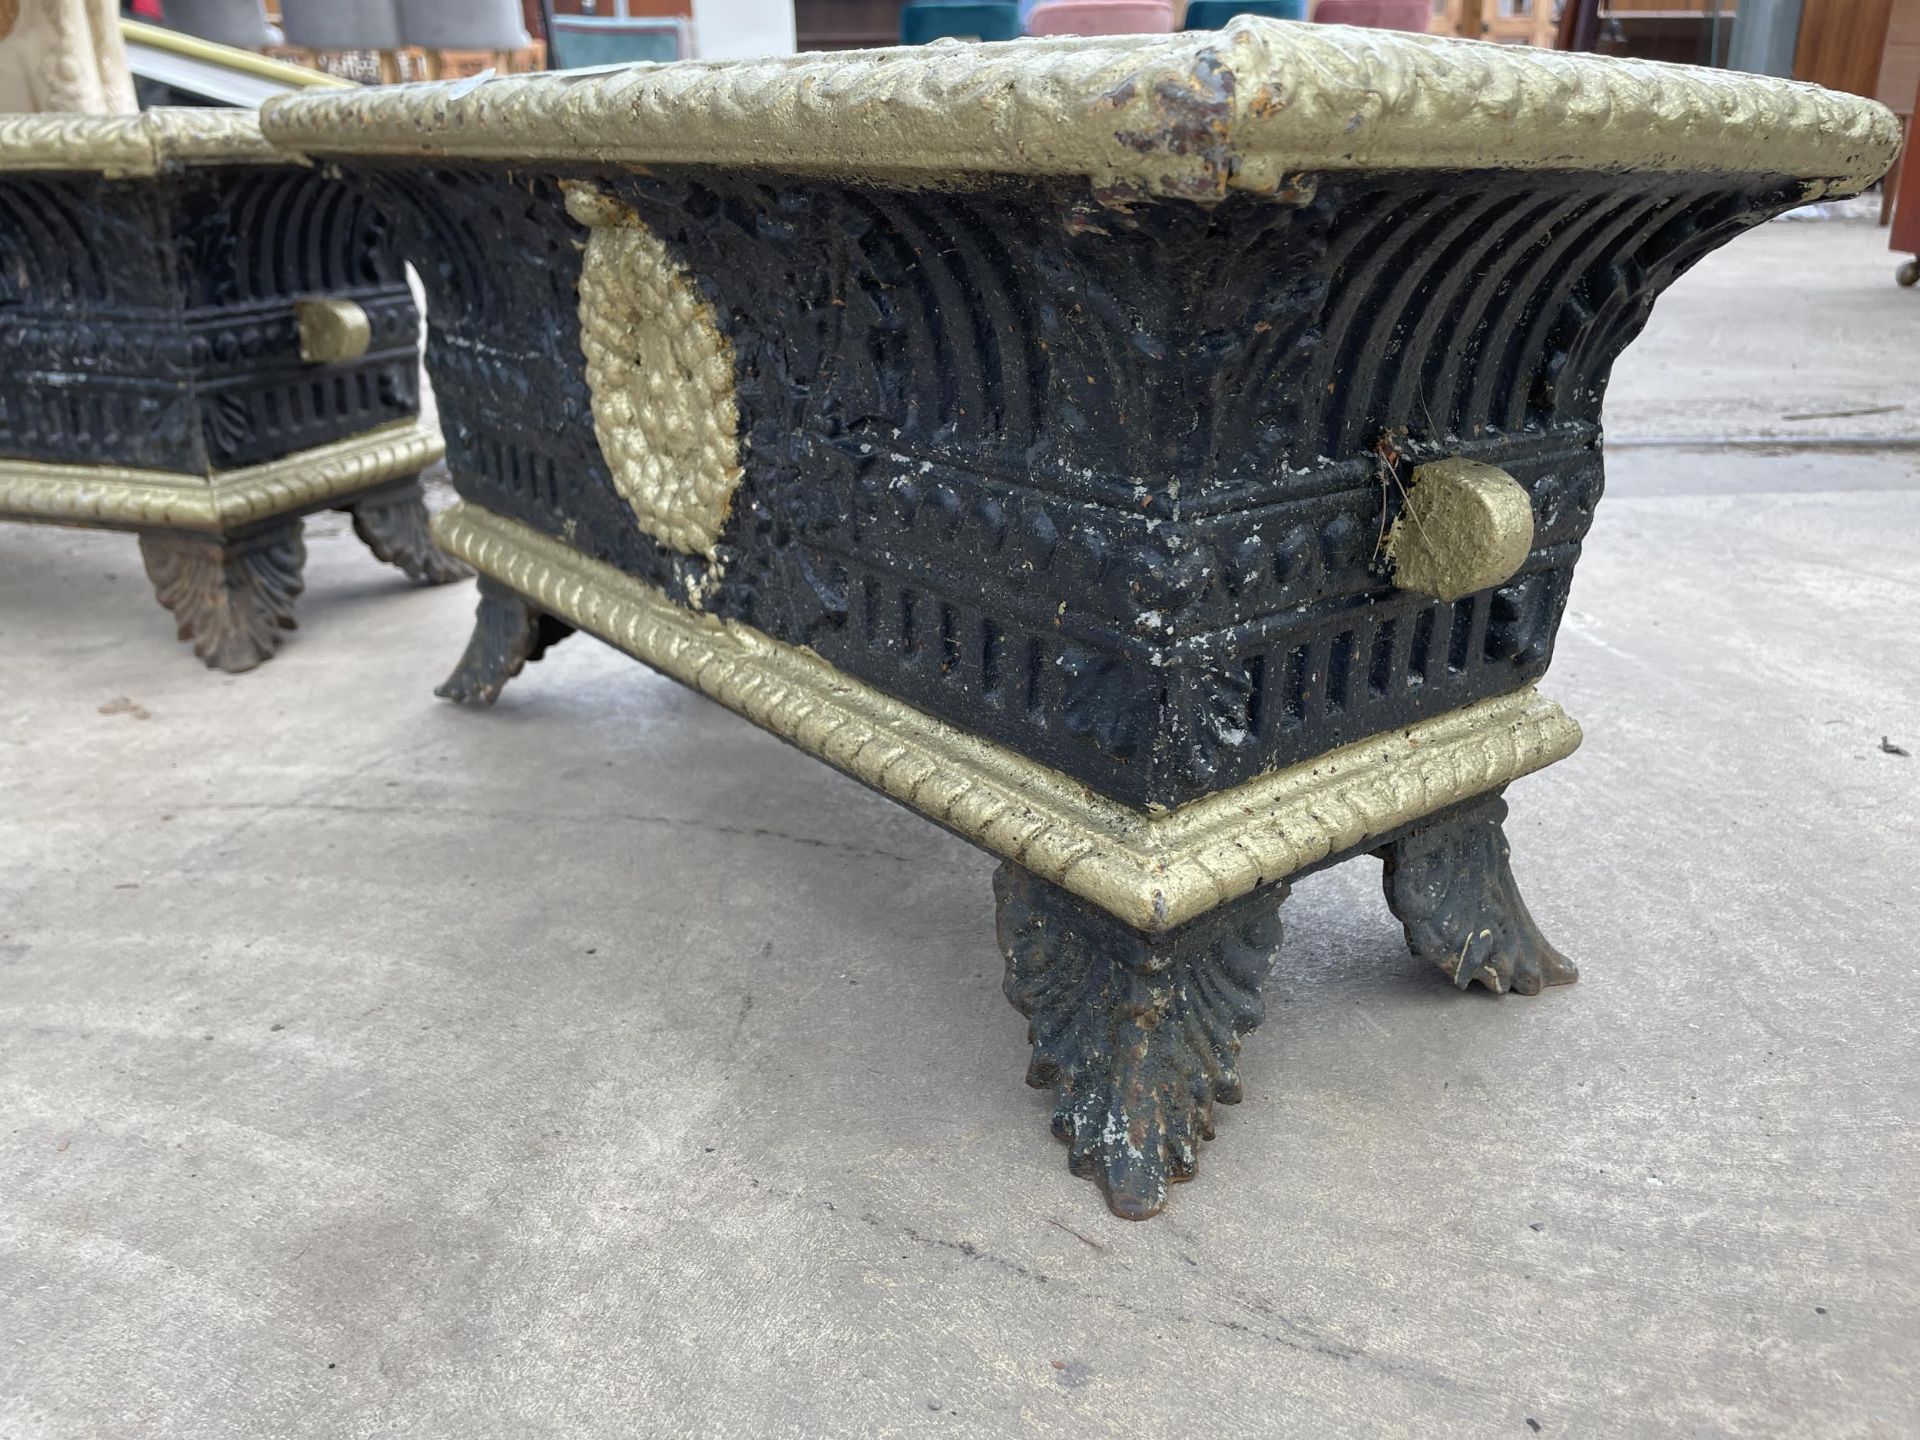 A PAIR OF VINTAGE DECORATIVE BLACK AND GOLD PAINTED CAST IRON TROUGH PLANTERS - Image 4 of 7